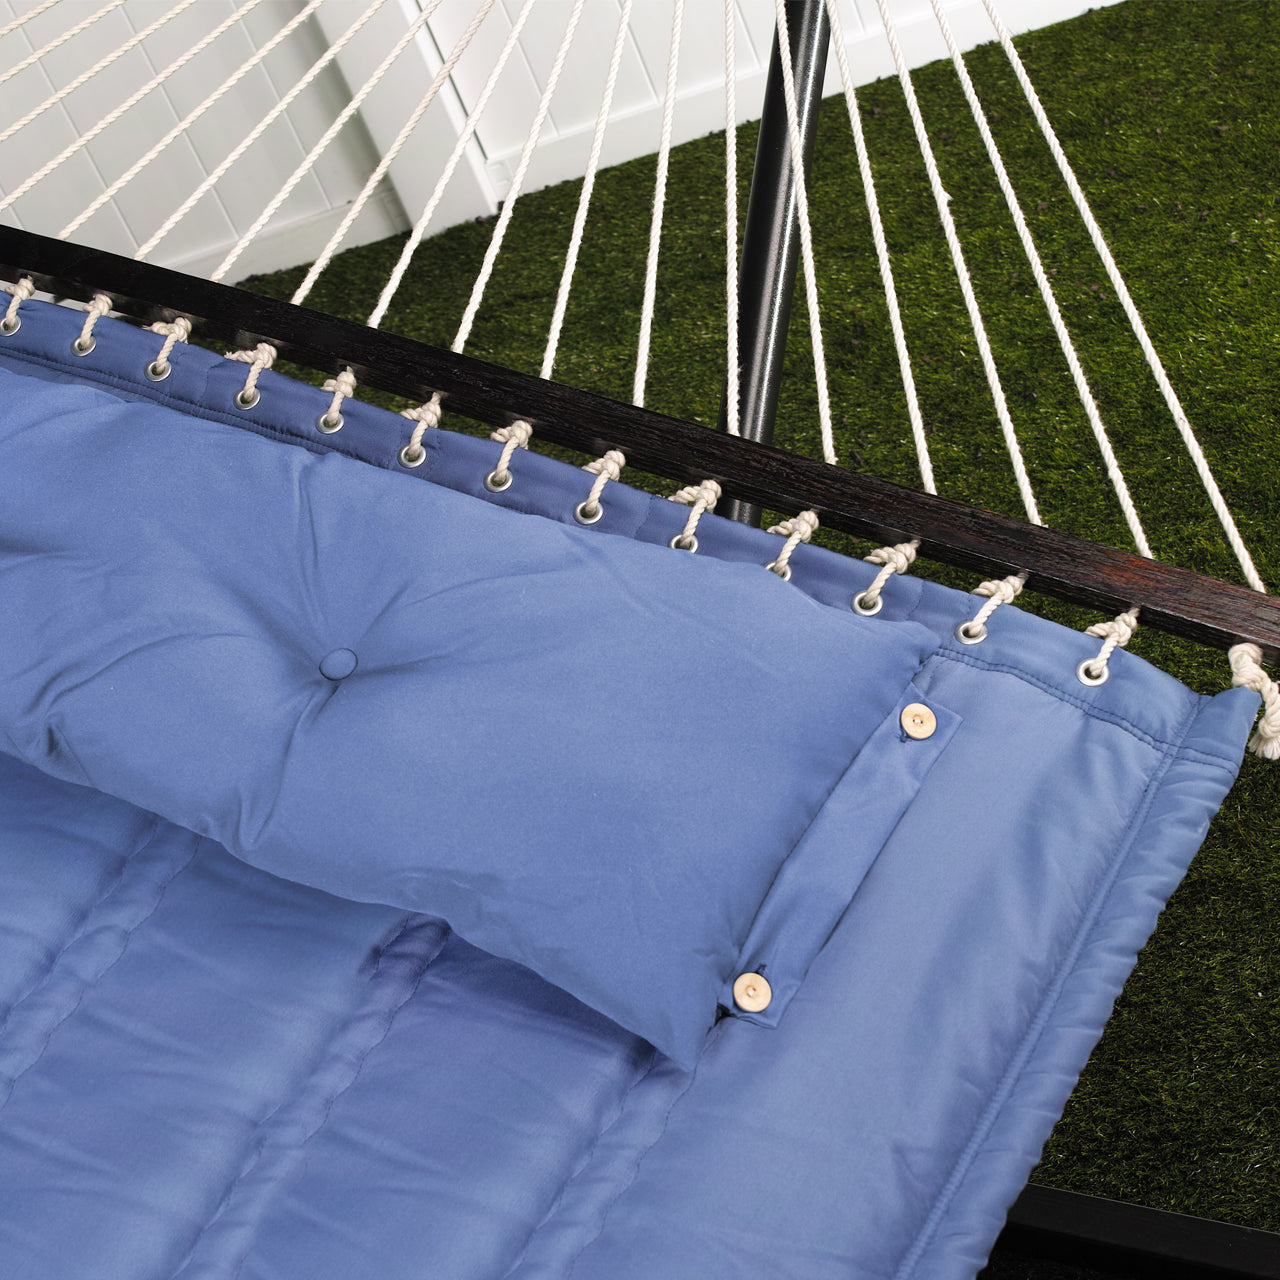 Close up of the fabric and spreader bar for the Bliss Hammocks 55-inch Wide Quilted Hammock with Spreader Bars and Pillow in the denim blue variation.